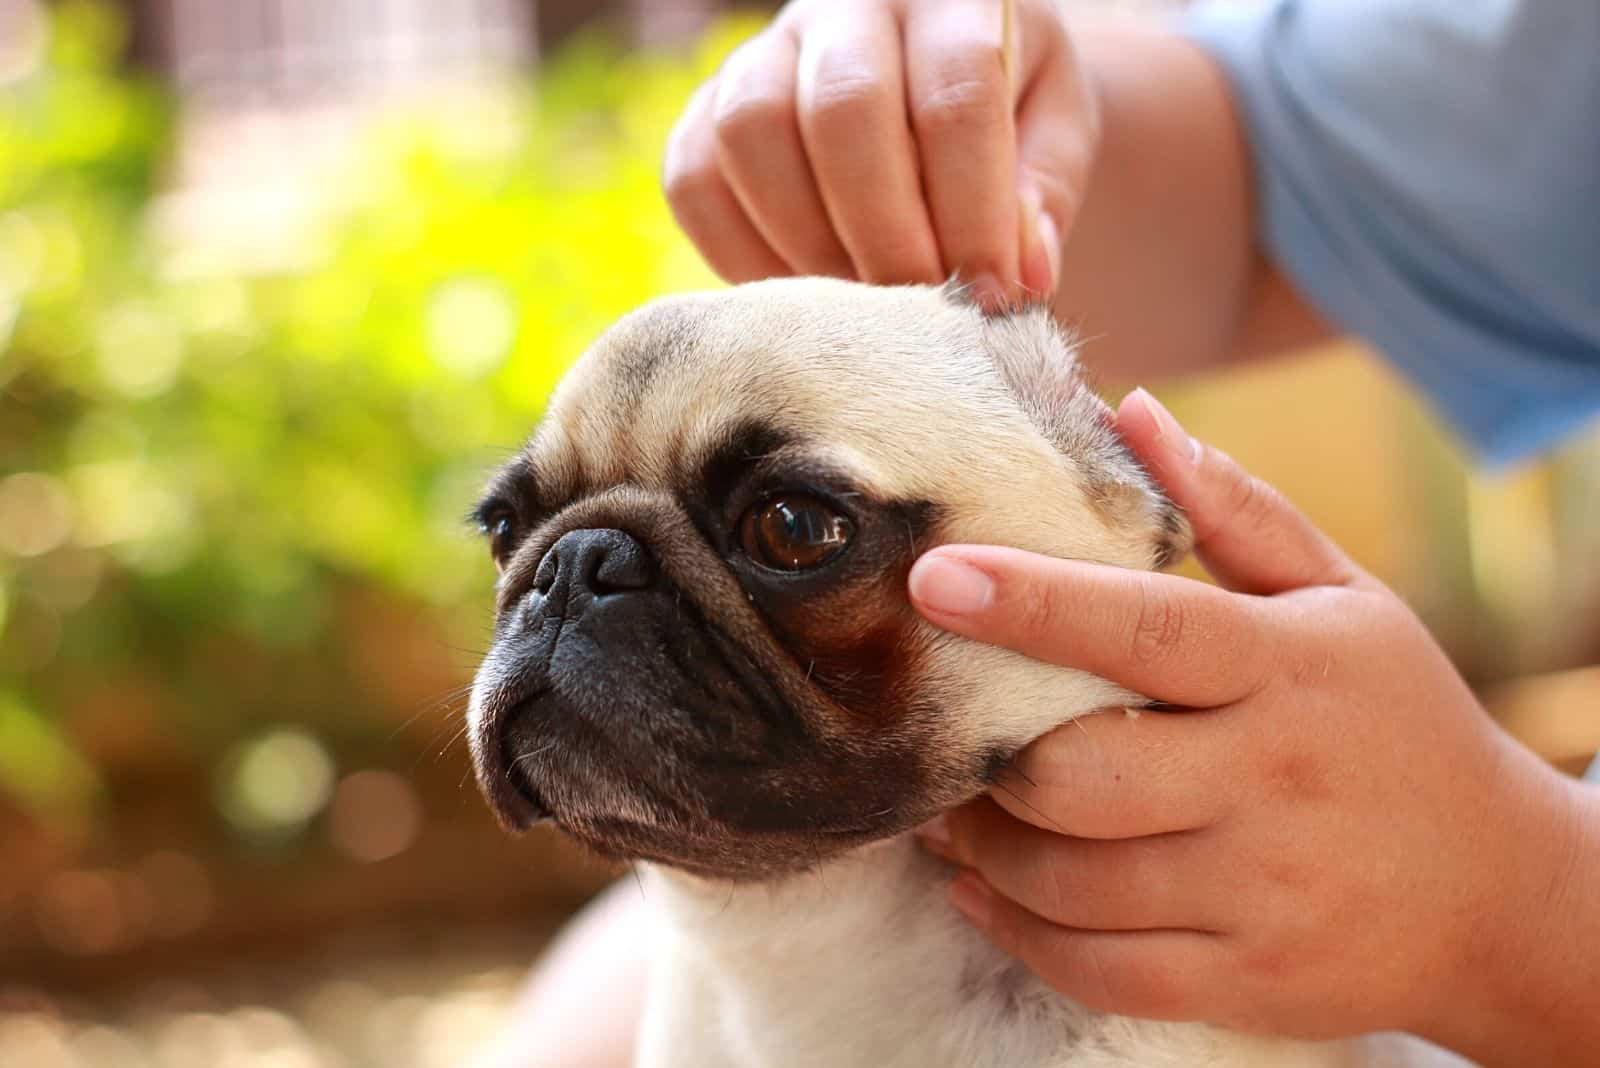 the man cleans the dog's ears